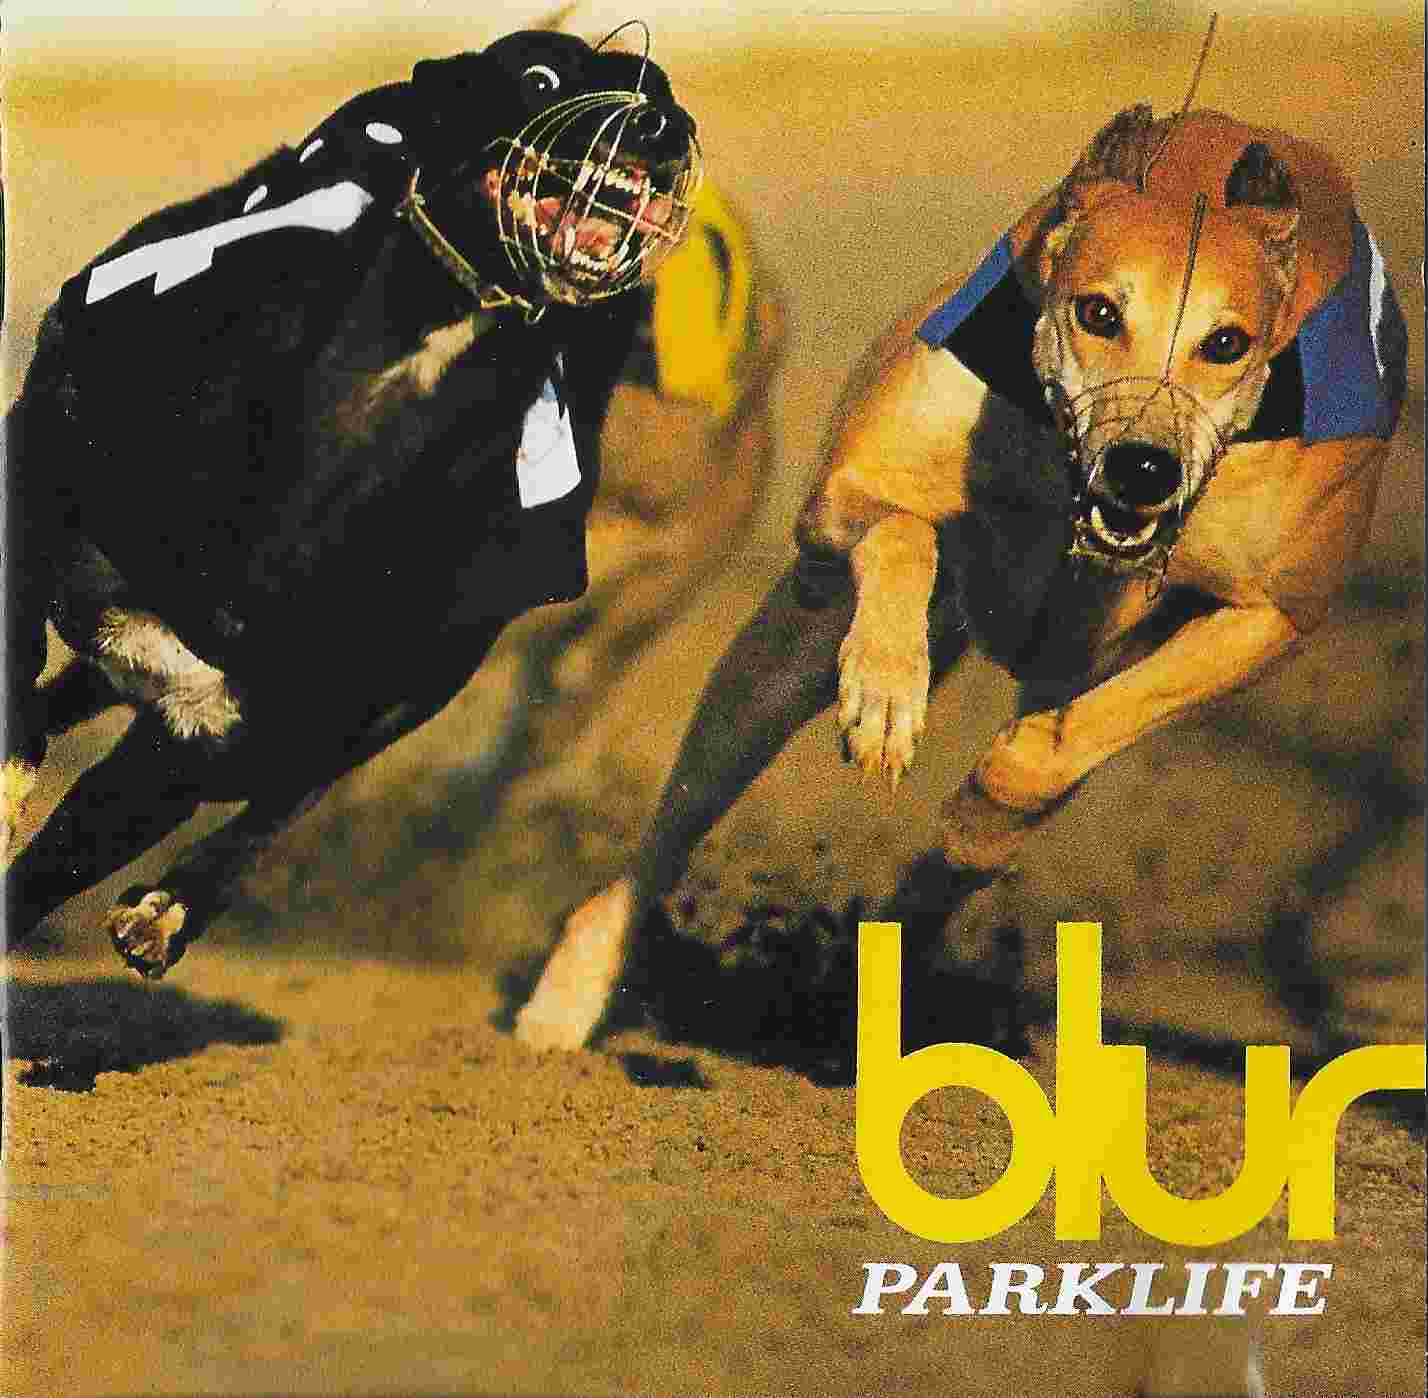 Picture of Parklife by artist Blur 